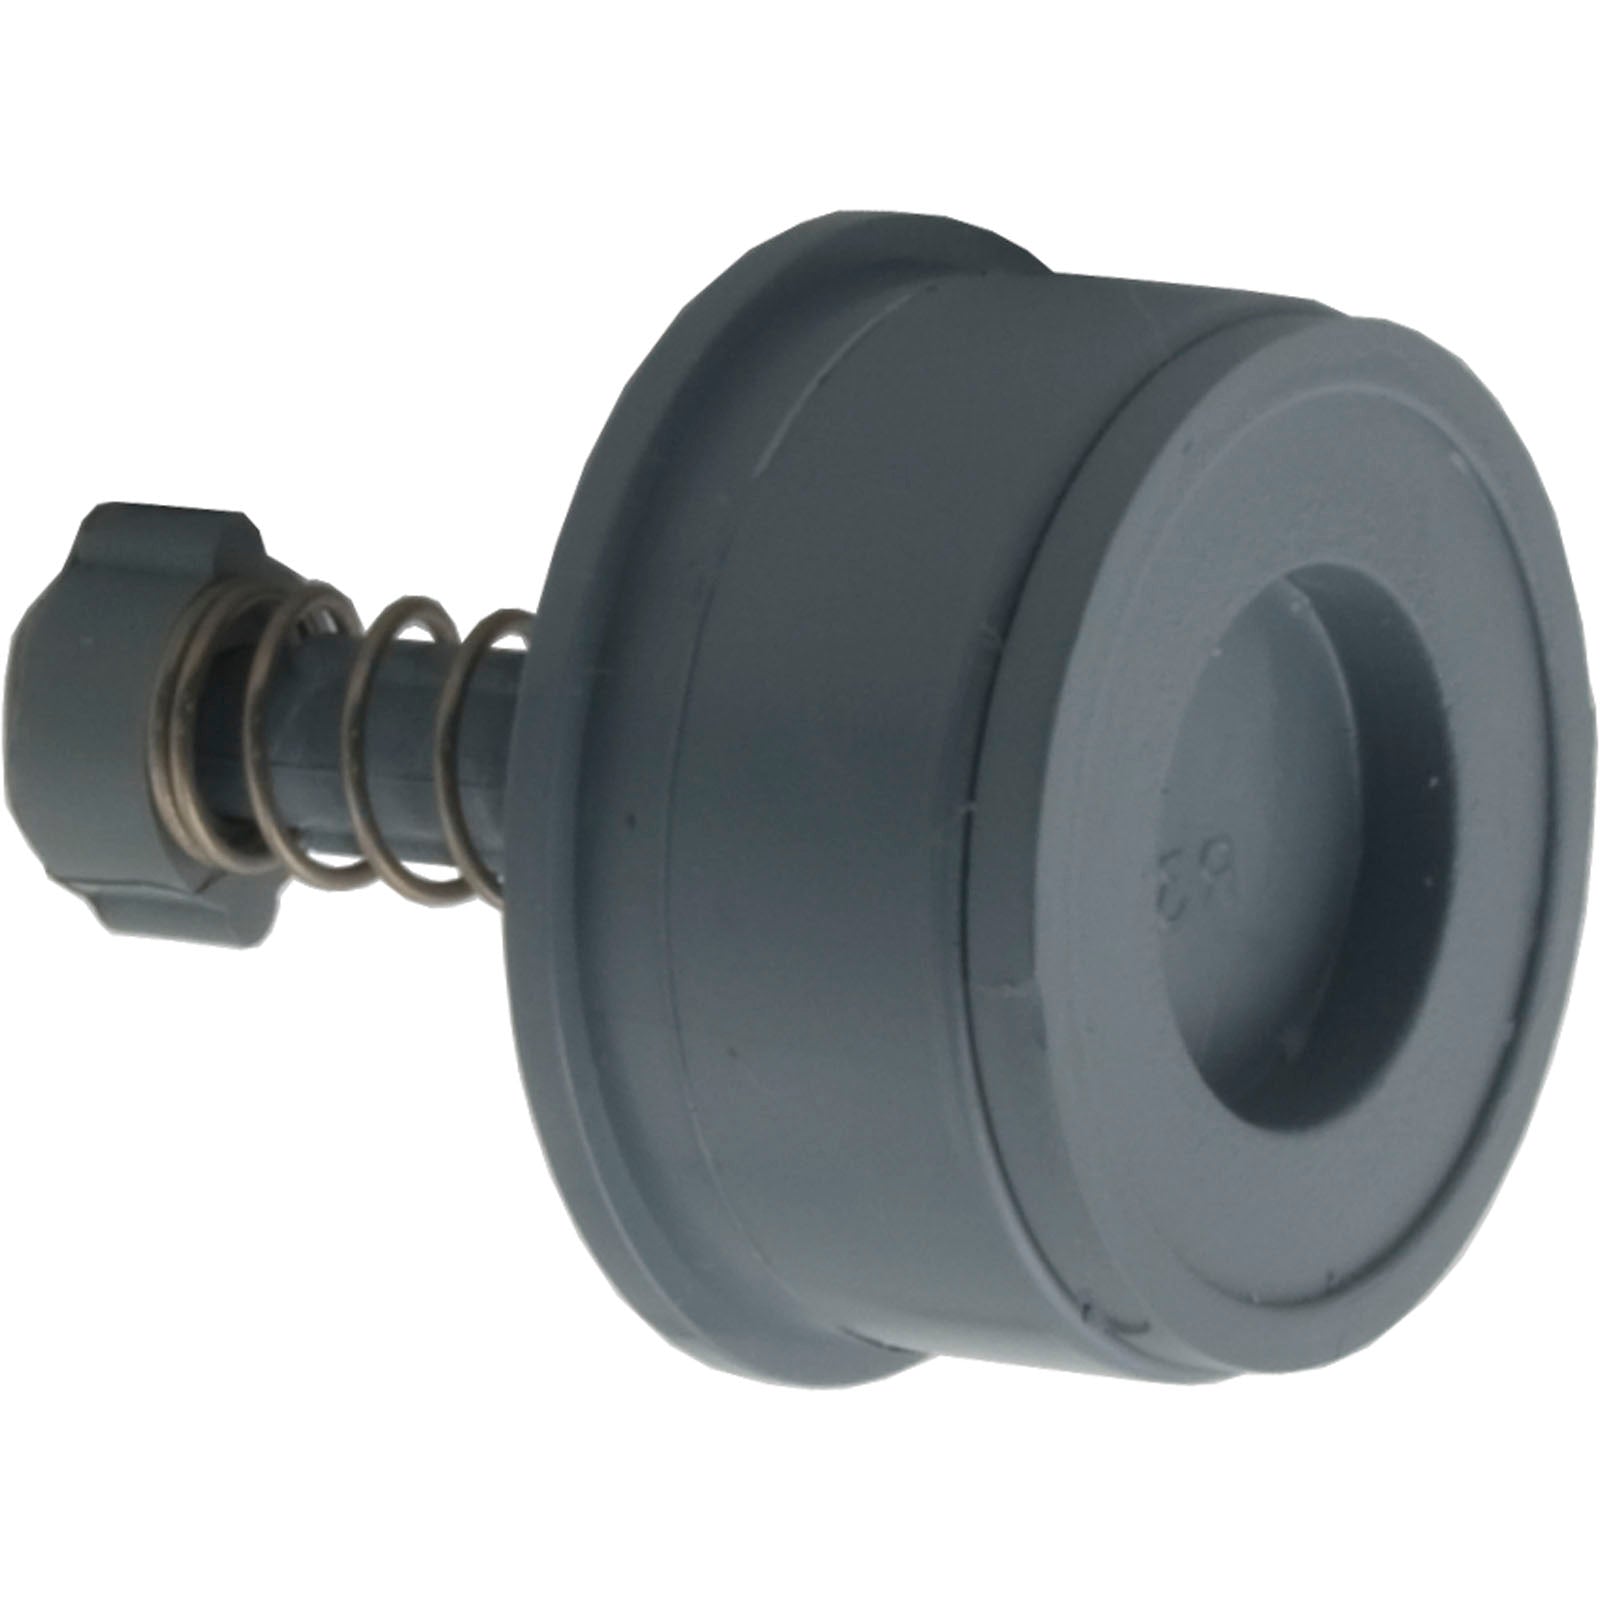 Bypass Valve, WW In-Line/Top Load/Mount/Front Access, 1-1/2"- 600-1000